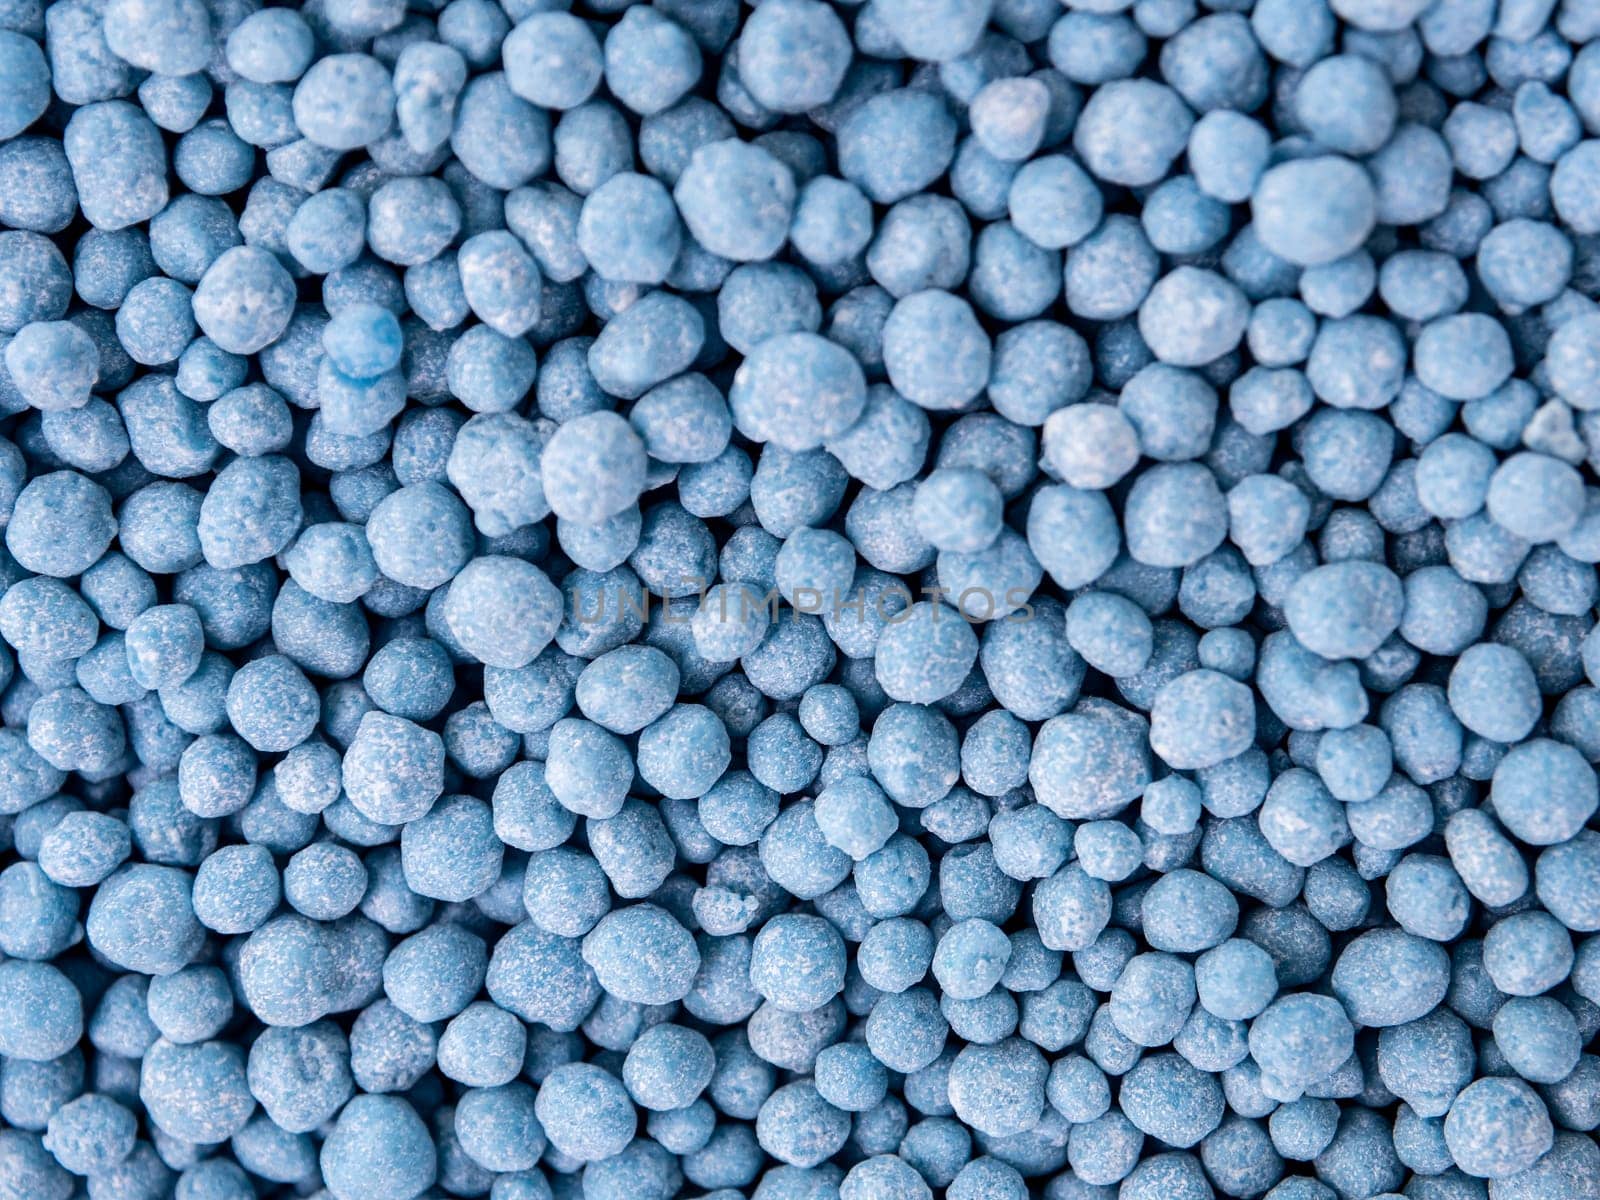 Small blue round granules are chemical fertilizers by Satakorn